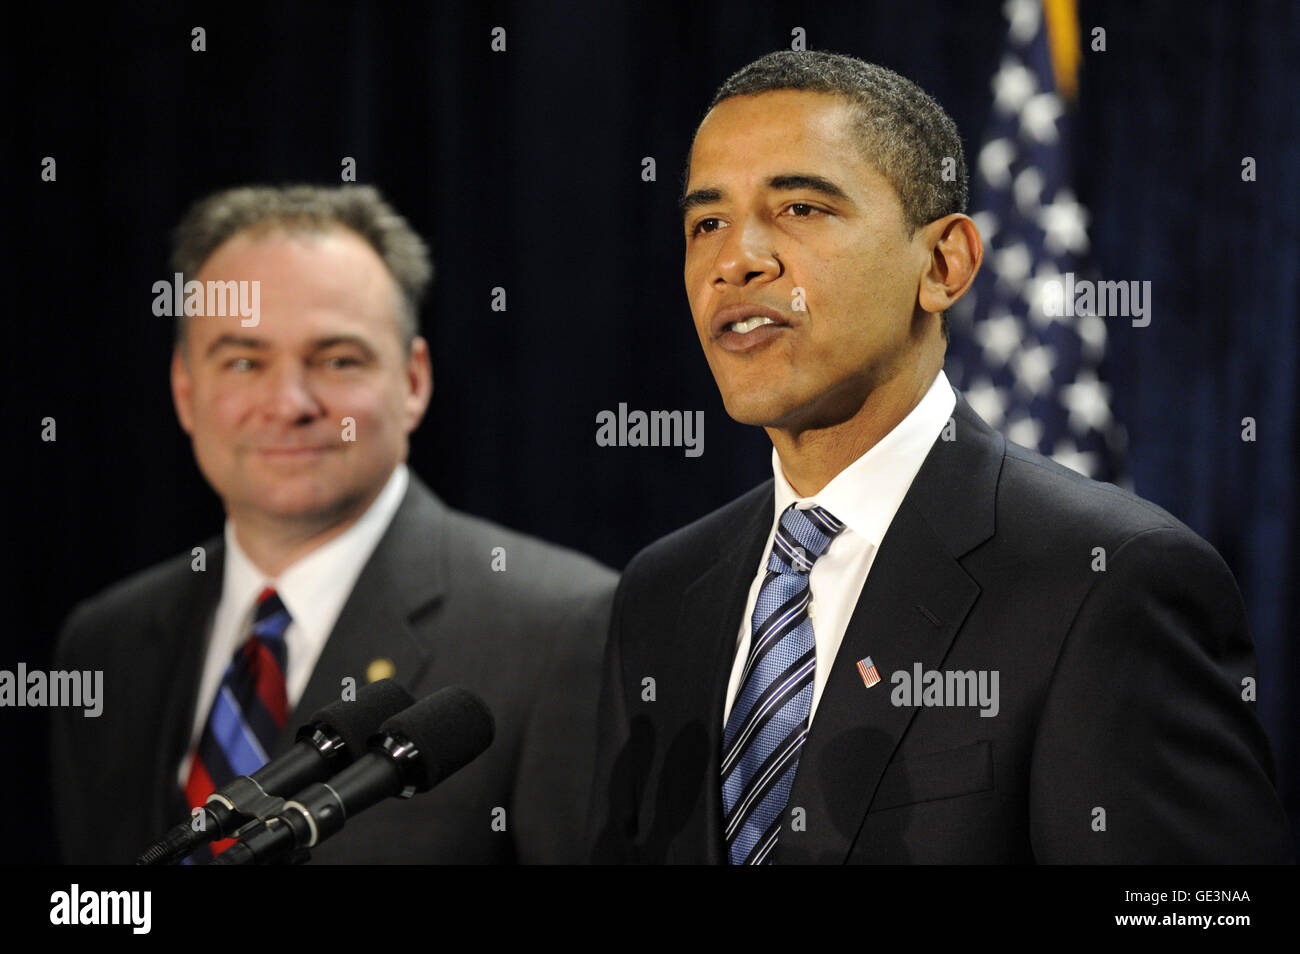 Washington, District of Columbia, USA. 8th Jan, 2009. Washington, DC - January 8, 2009 -- United States President-elect Barack Obama (R) introduces Virginia Governor Tim Kaine (L) as the new Chairman of the Democratic National Committee in Washington on Thursday, January 8, 2009. Credit: Kevin Dietsch - Pool via CNP © Kevin Dietsch/CNP/ZUMA Wire/Alamy Live News Stock Photo